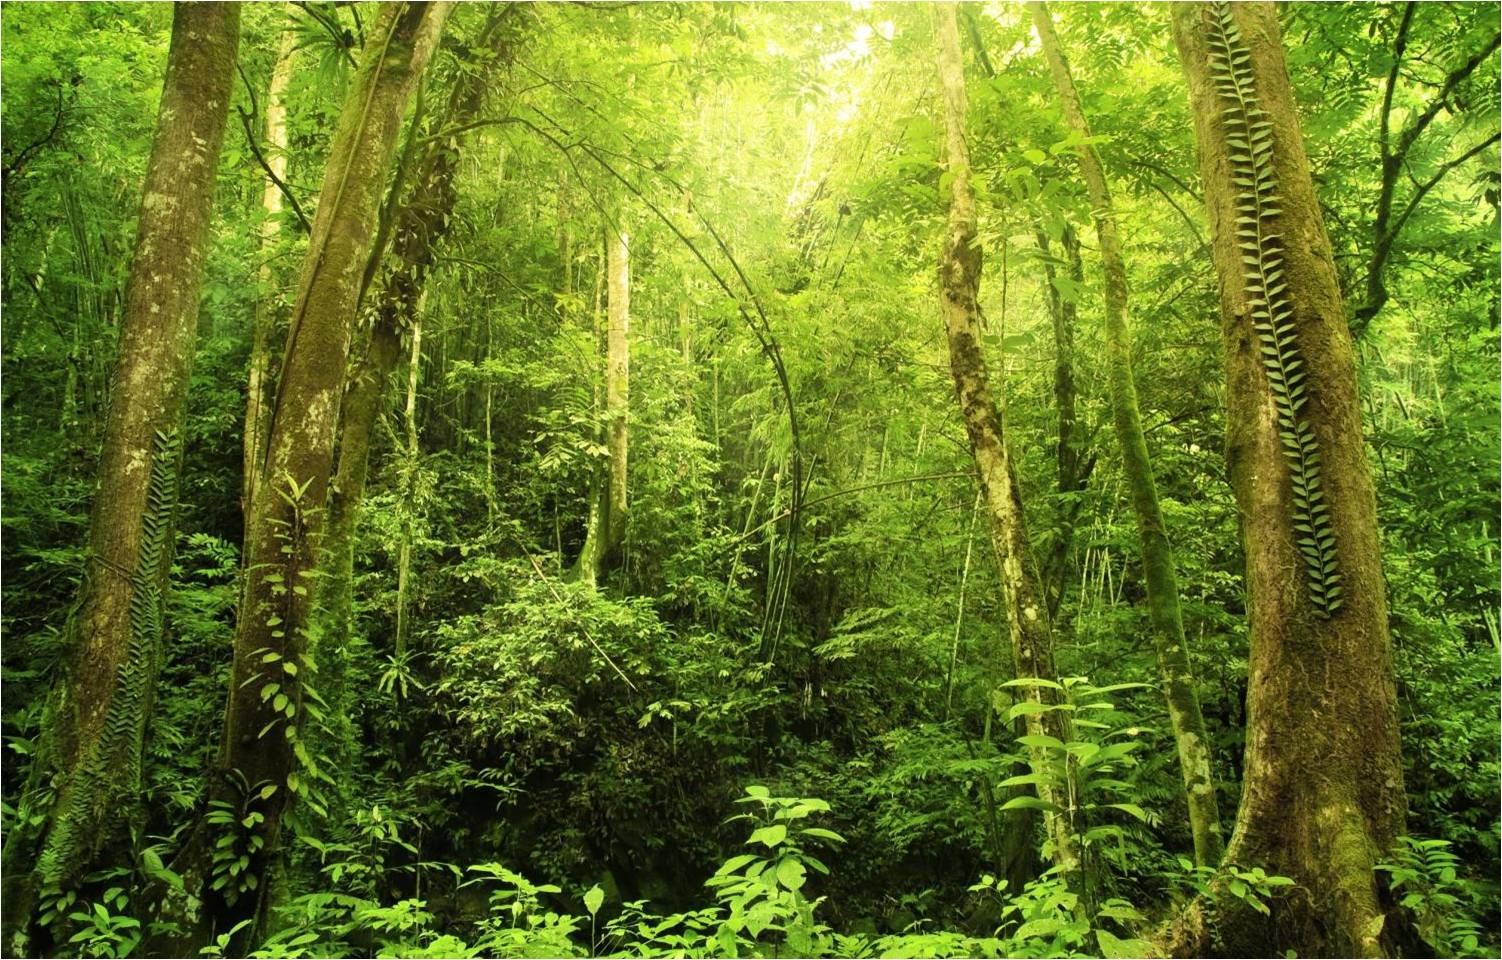 Forests are carbon sinks